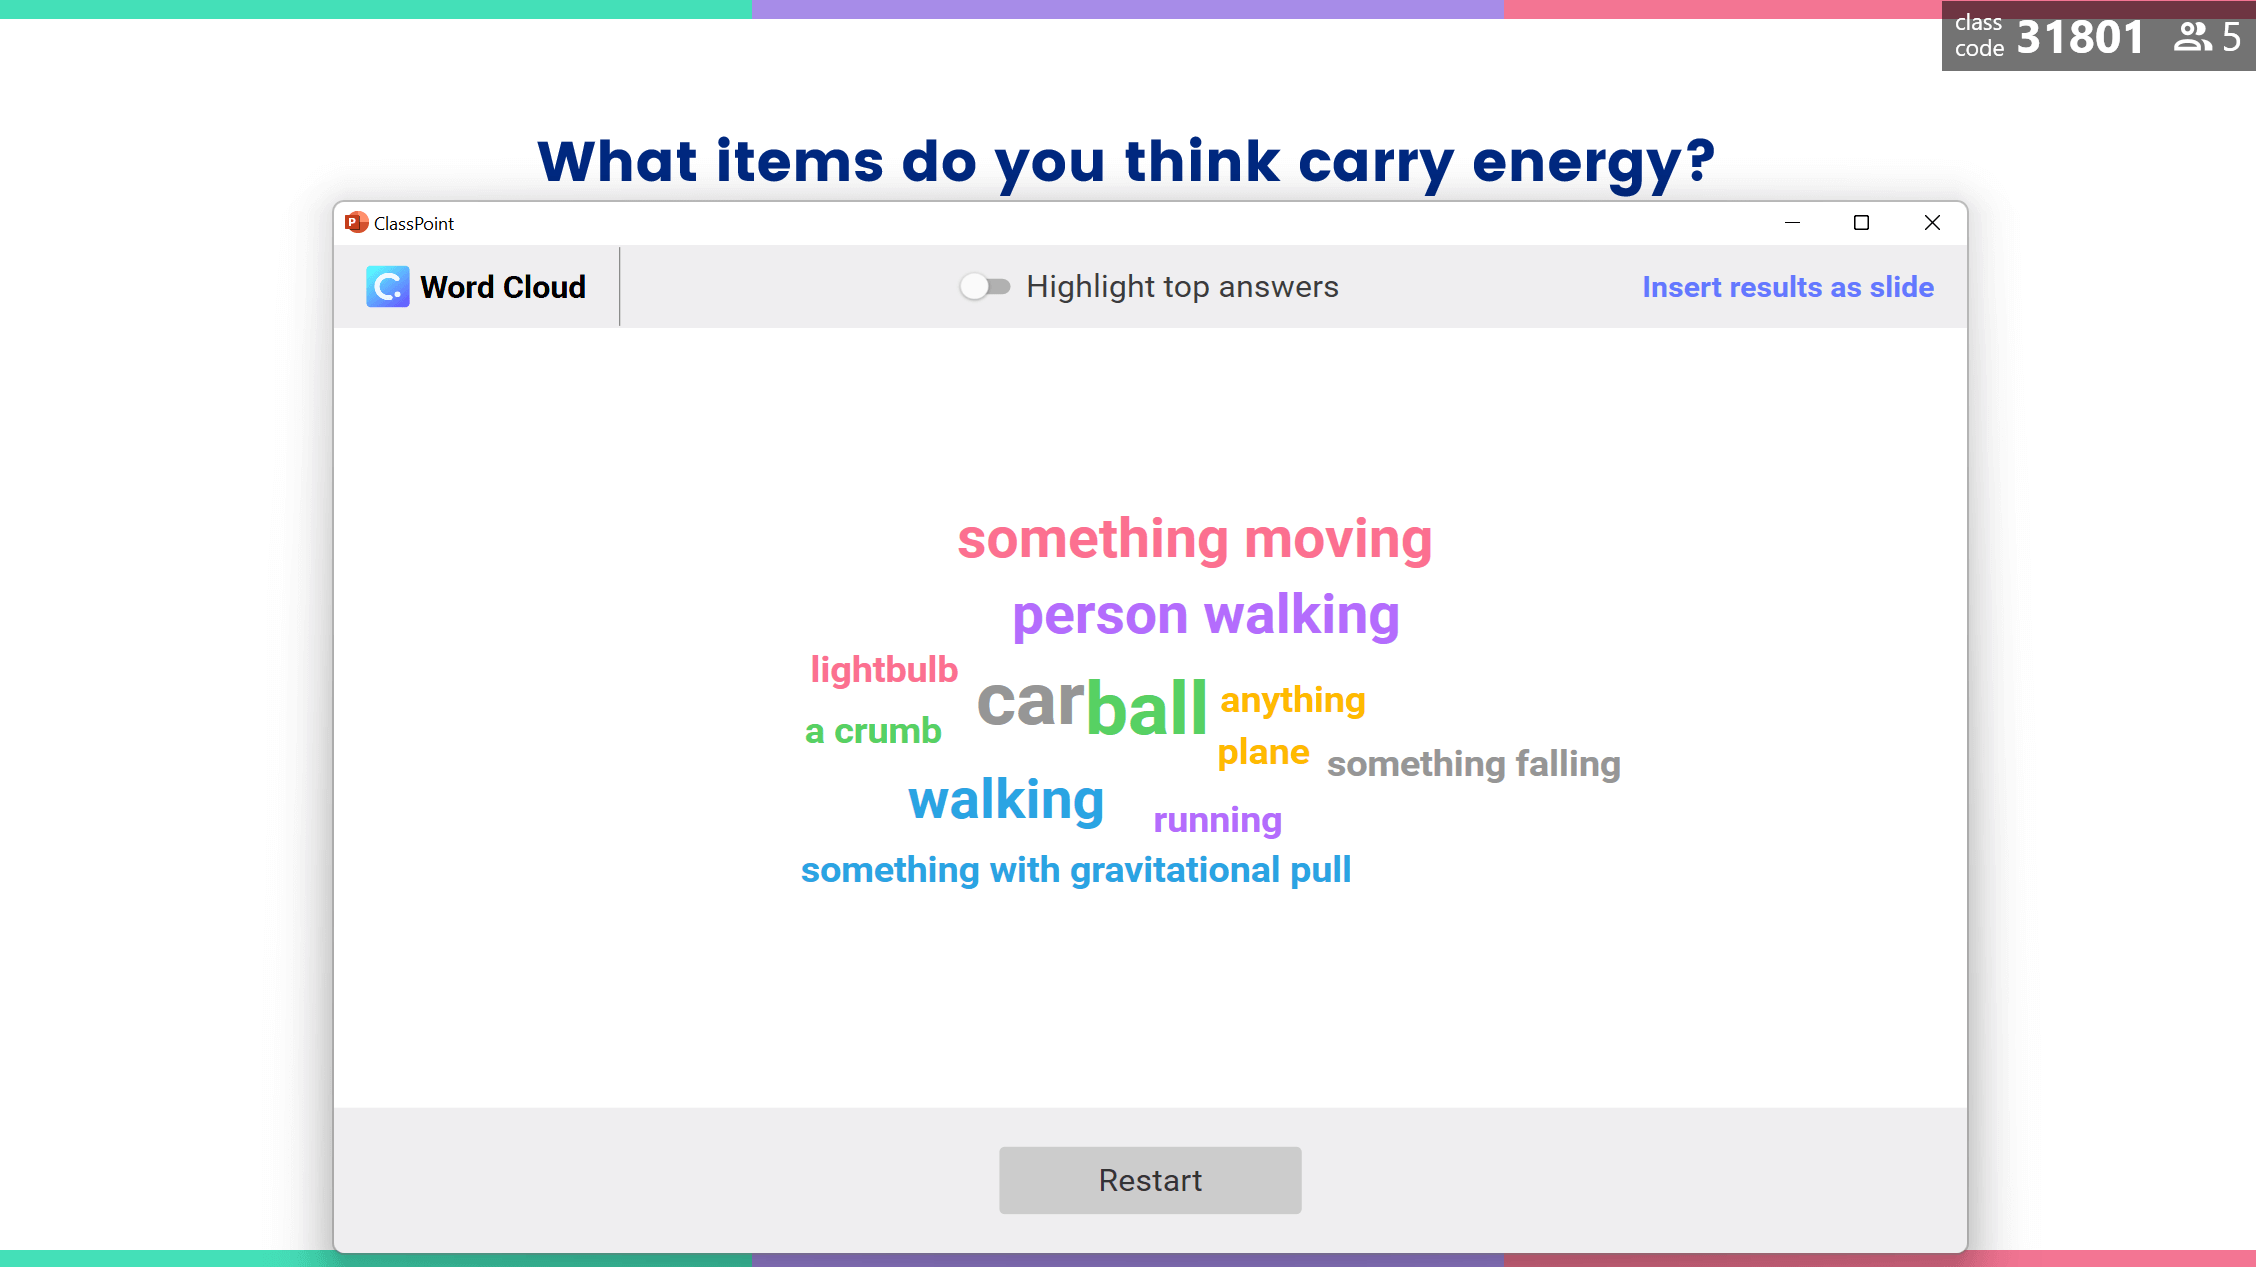 Word Cloud activities: What items do you think carry energy?